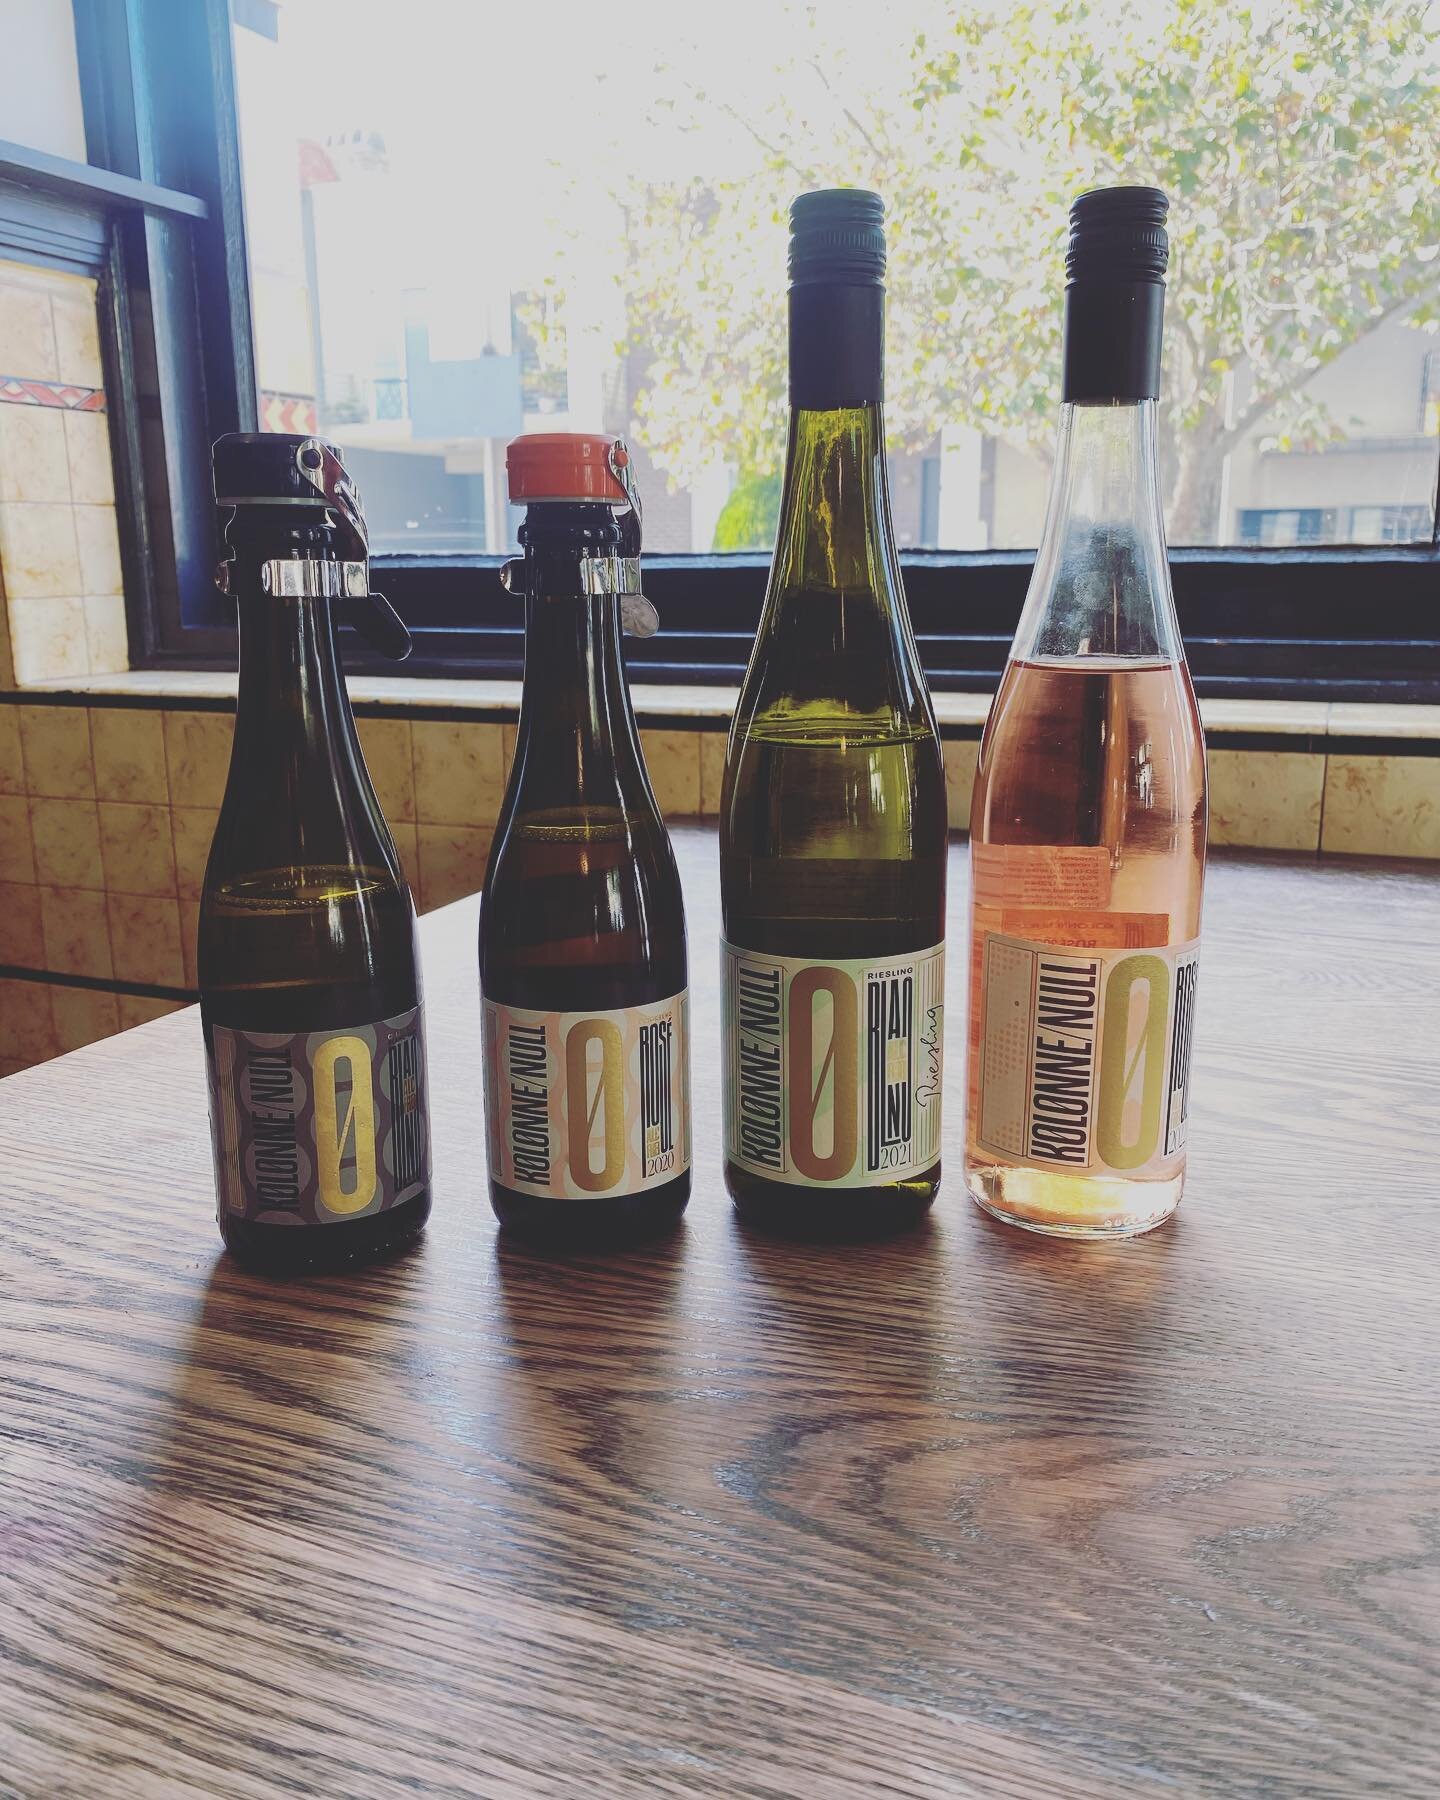 We were lucky enough to sit down with @tales_by_the_glass from @enotecasydney to taste the latest range of @kolonnenull a few weeks ago. These wines were are so exciting. Beautifully made, varietal expressions. The bianco sparkling being our favourit